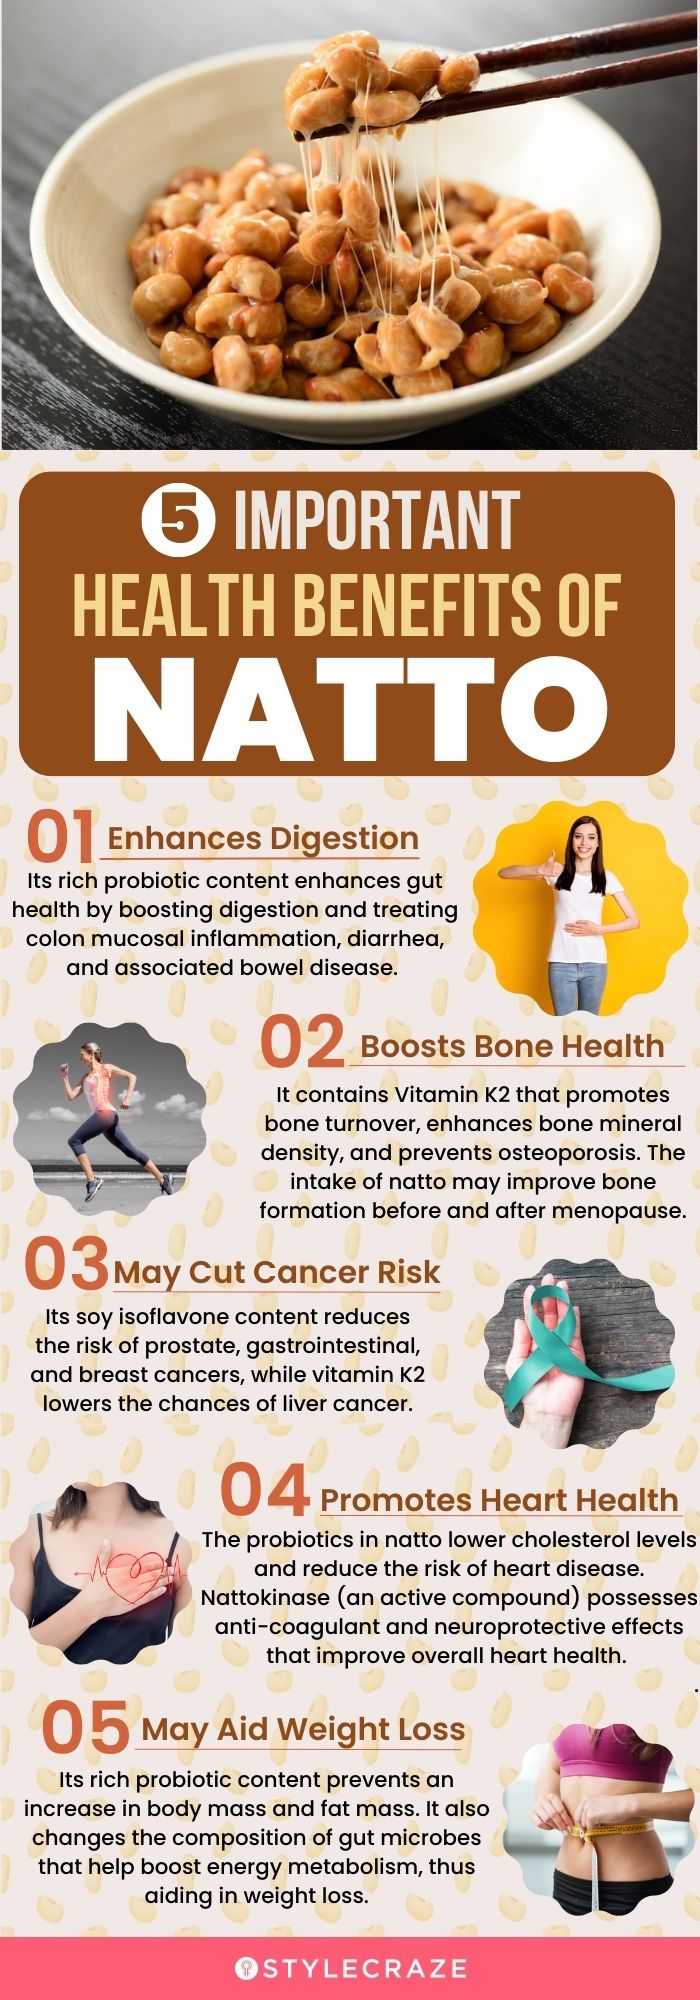 5 important health benefits of natto (infographic)